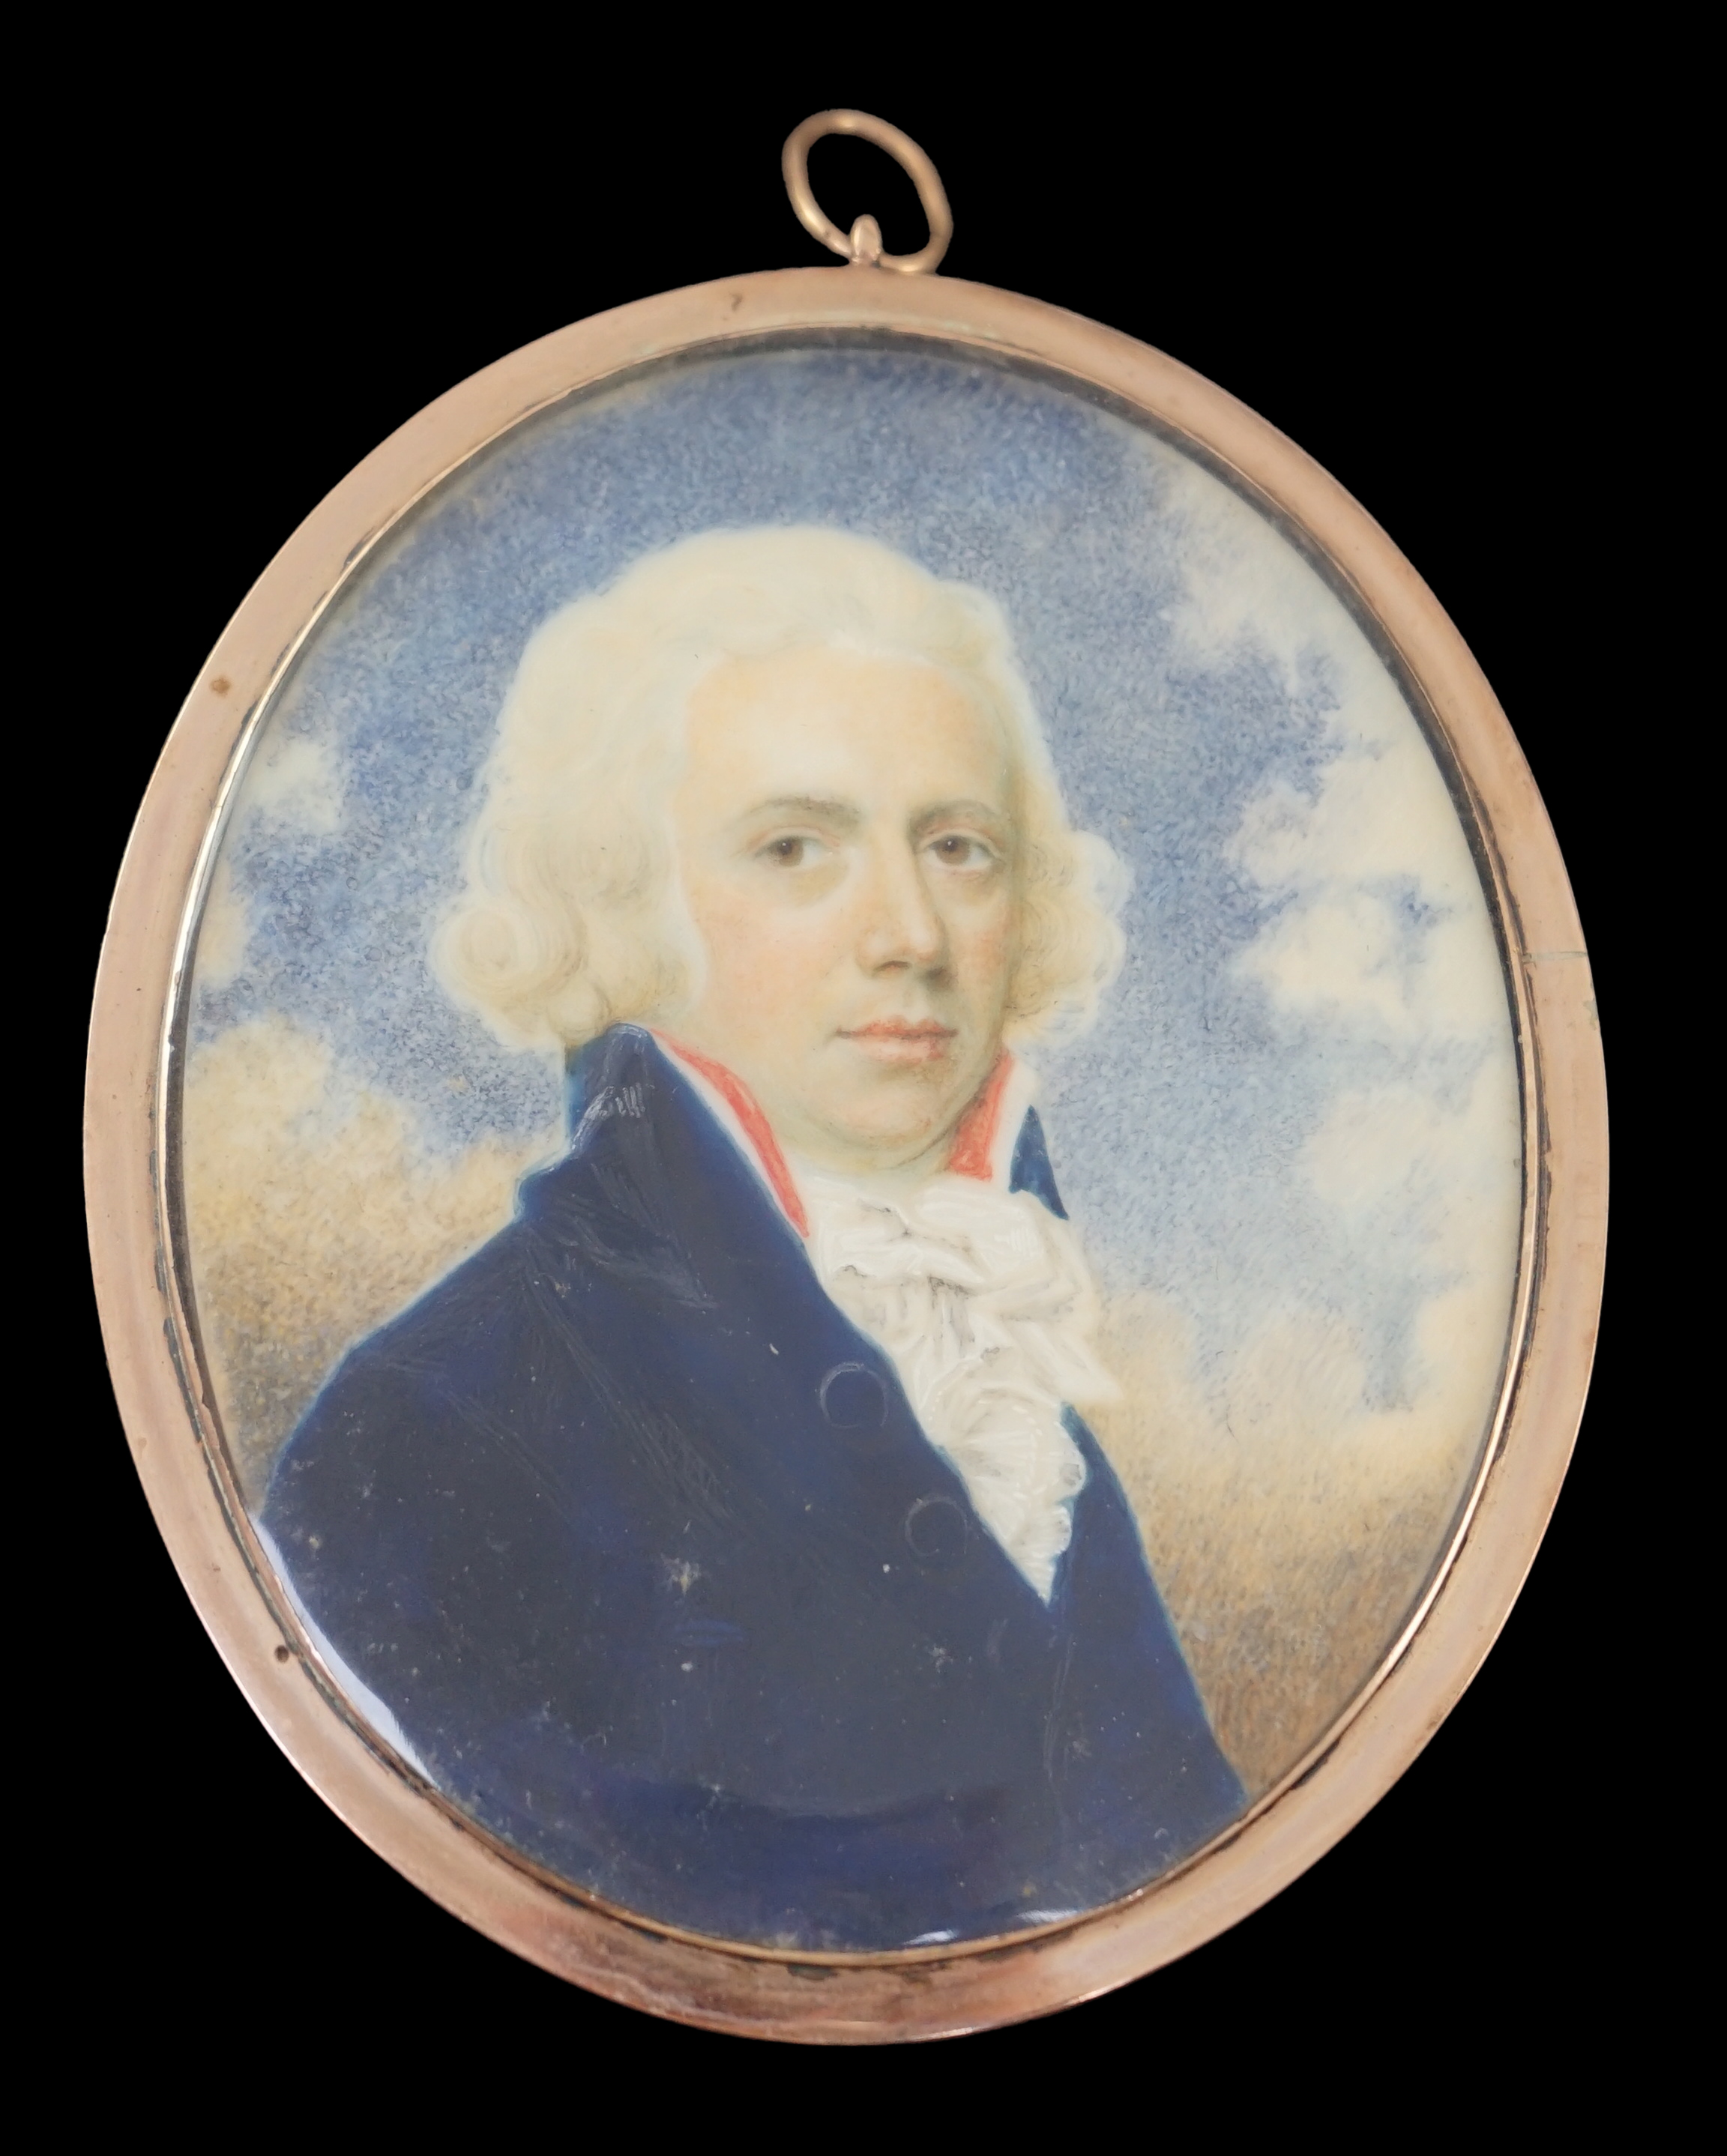 John Barry (fl.1784-1817), Portrait miniature of a gentleman, watercolour on ivory, 6.6 x 5.5cm. CITES Submission reference LY24QC3J